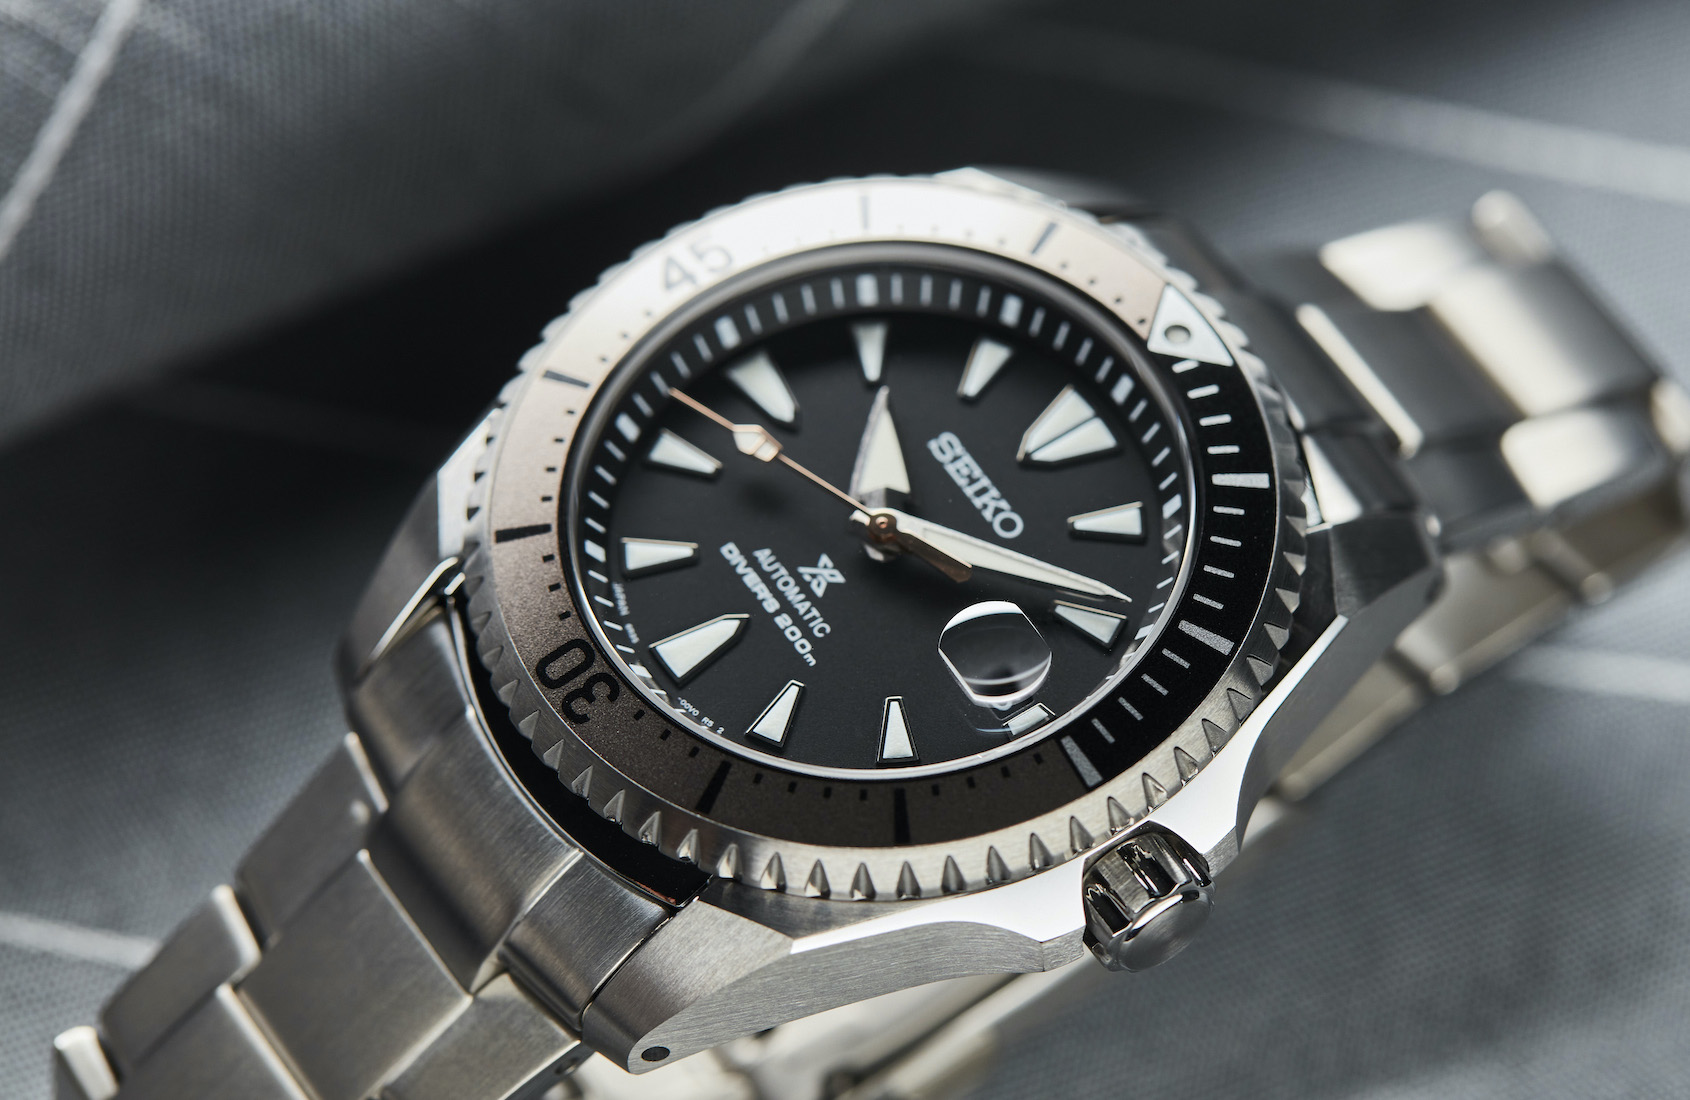 Byttehandel Sørge over Kalkun HANDS-ON: The new Shogun is finally here in the form of the Seiko Prospex  SPB189 and SPB191 - Time and Tide Watches